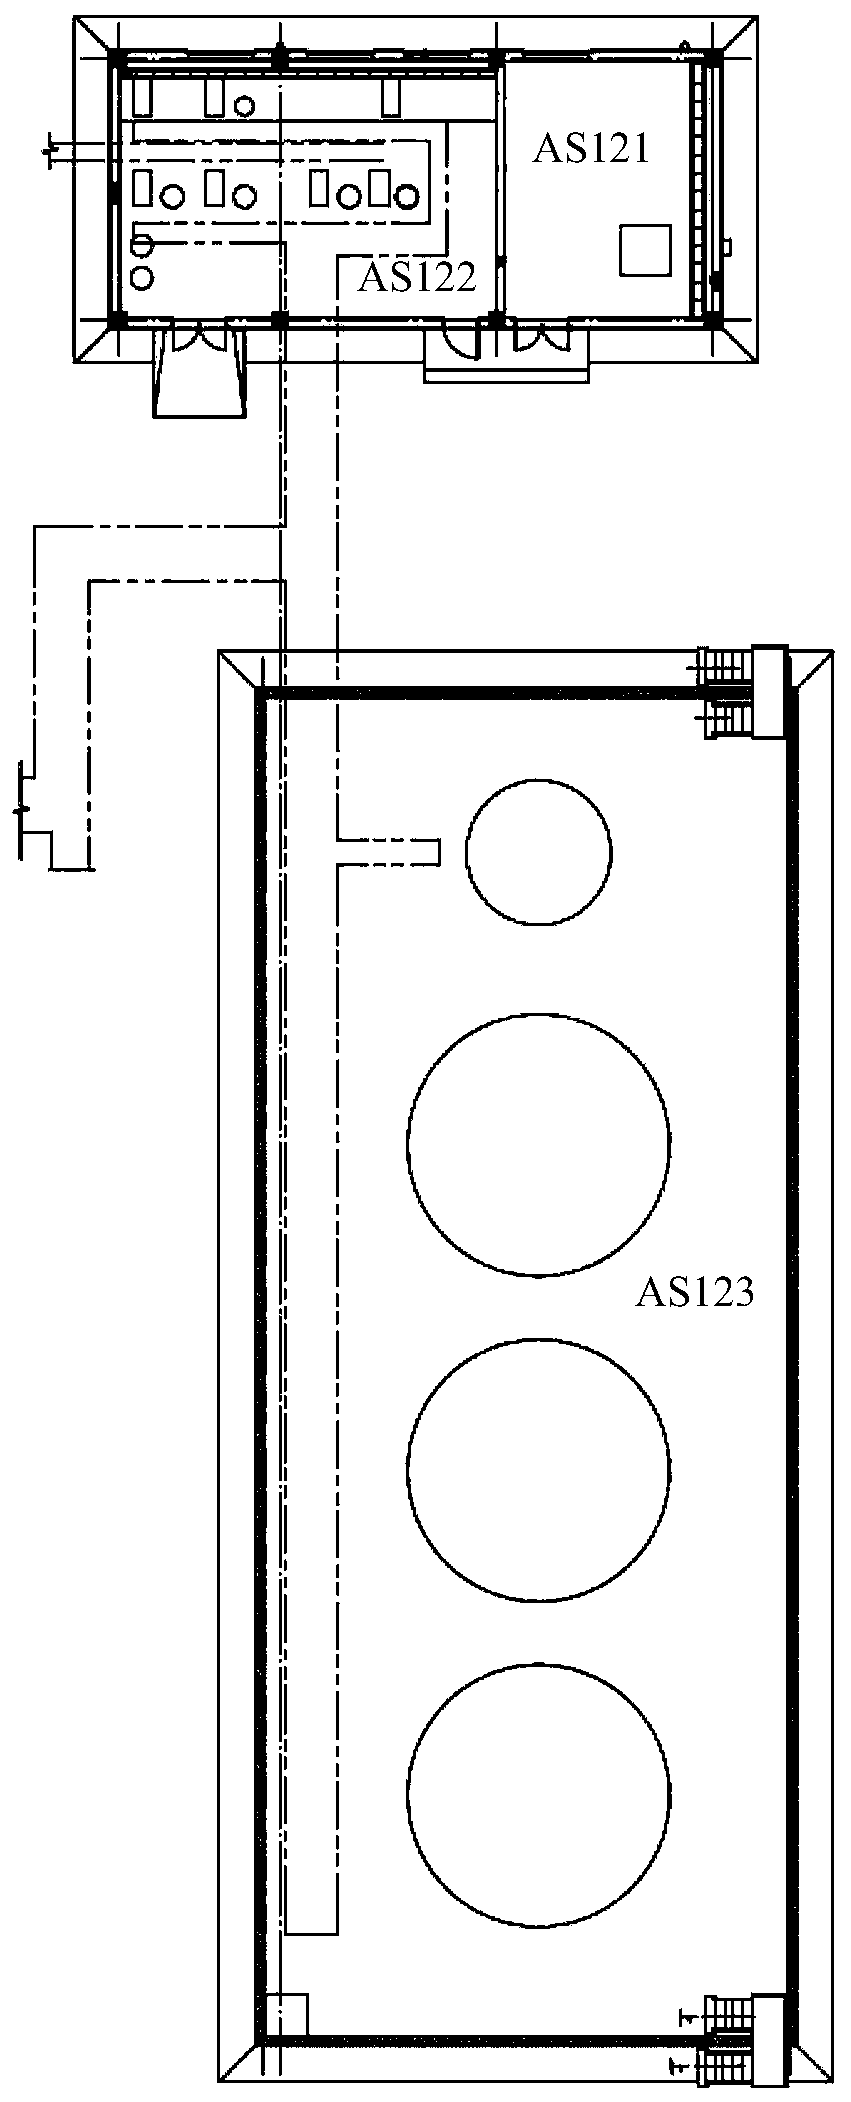 Arrangement structure of nuclear power station oil and gas boiler room